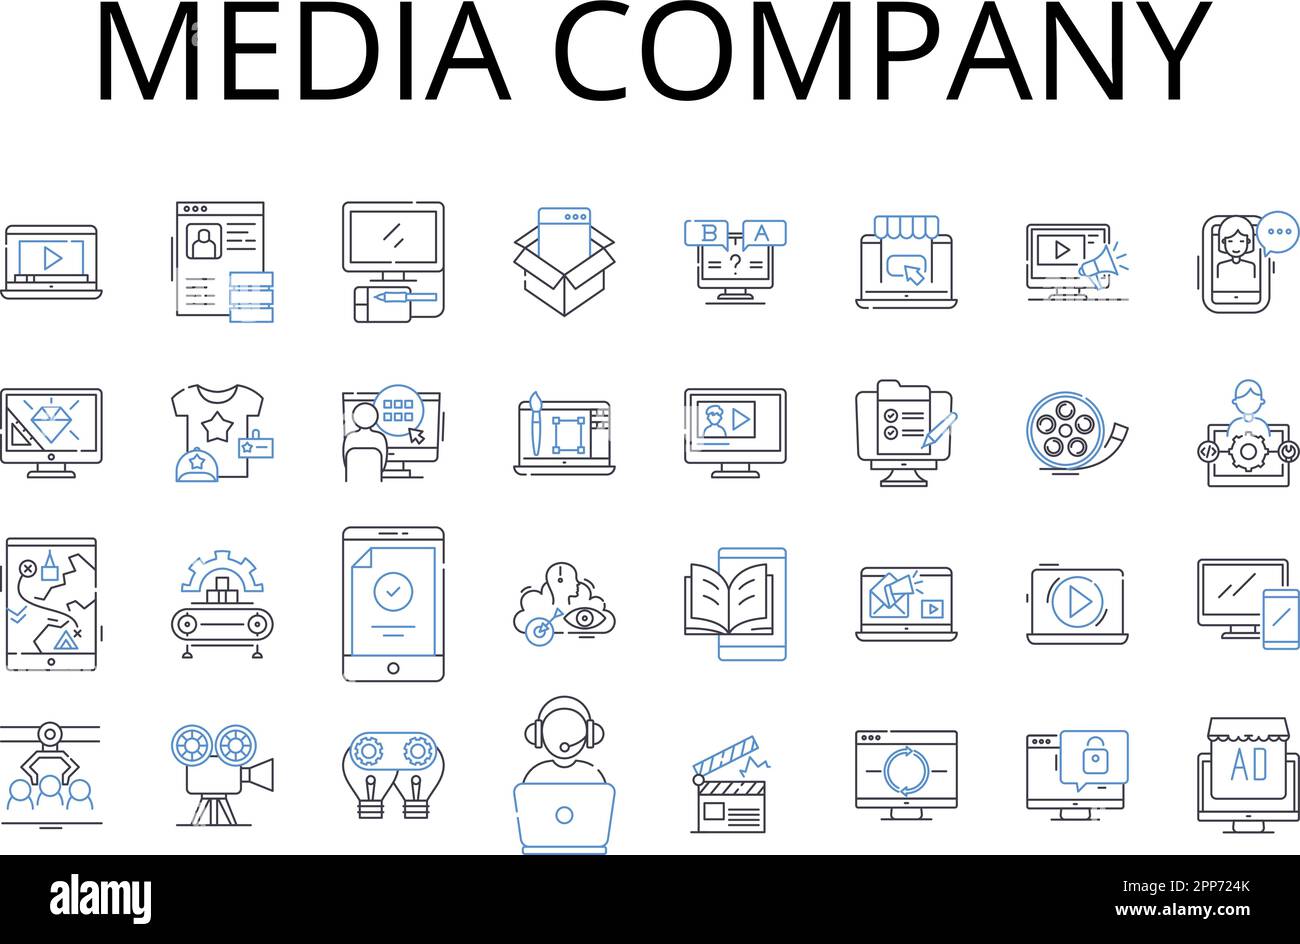 Media company line icons collection. Advertising firm, News outlet, Television nerk, Publishing house, Press agency, Film studio, Broadcasting company Stock Vector